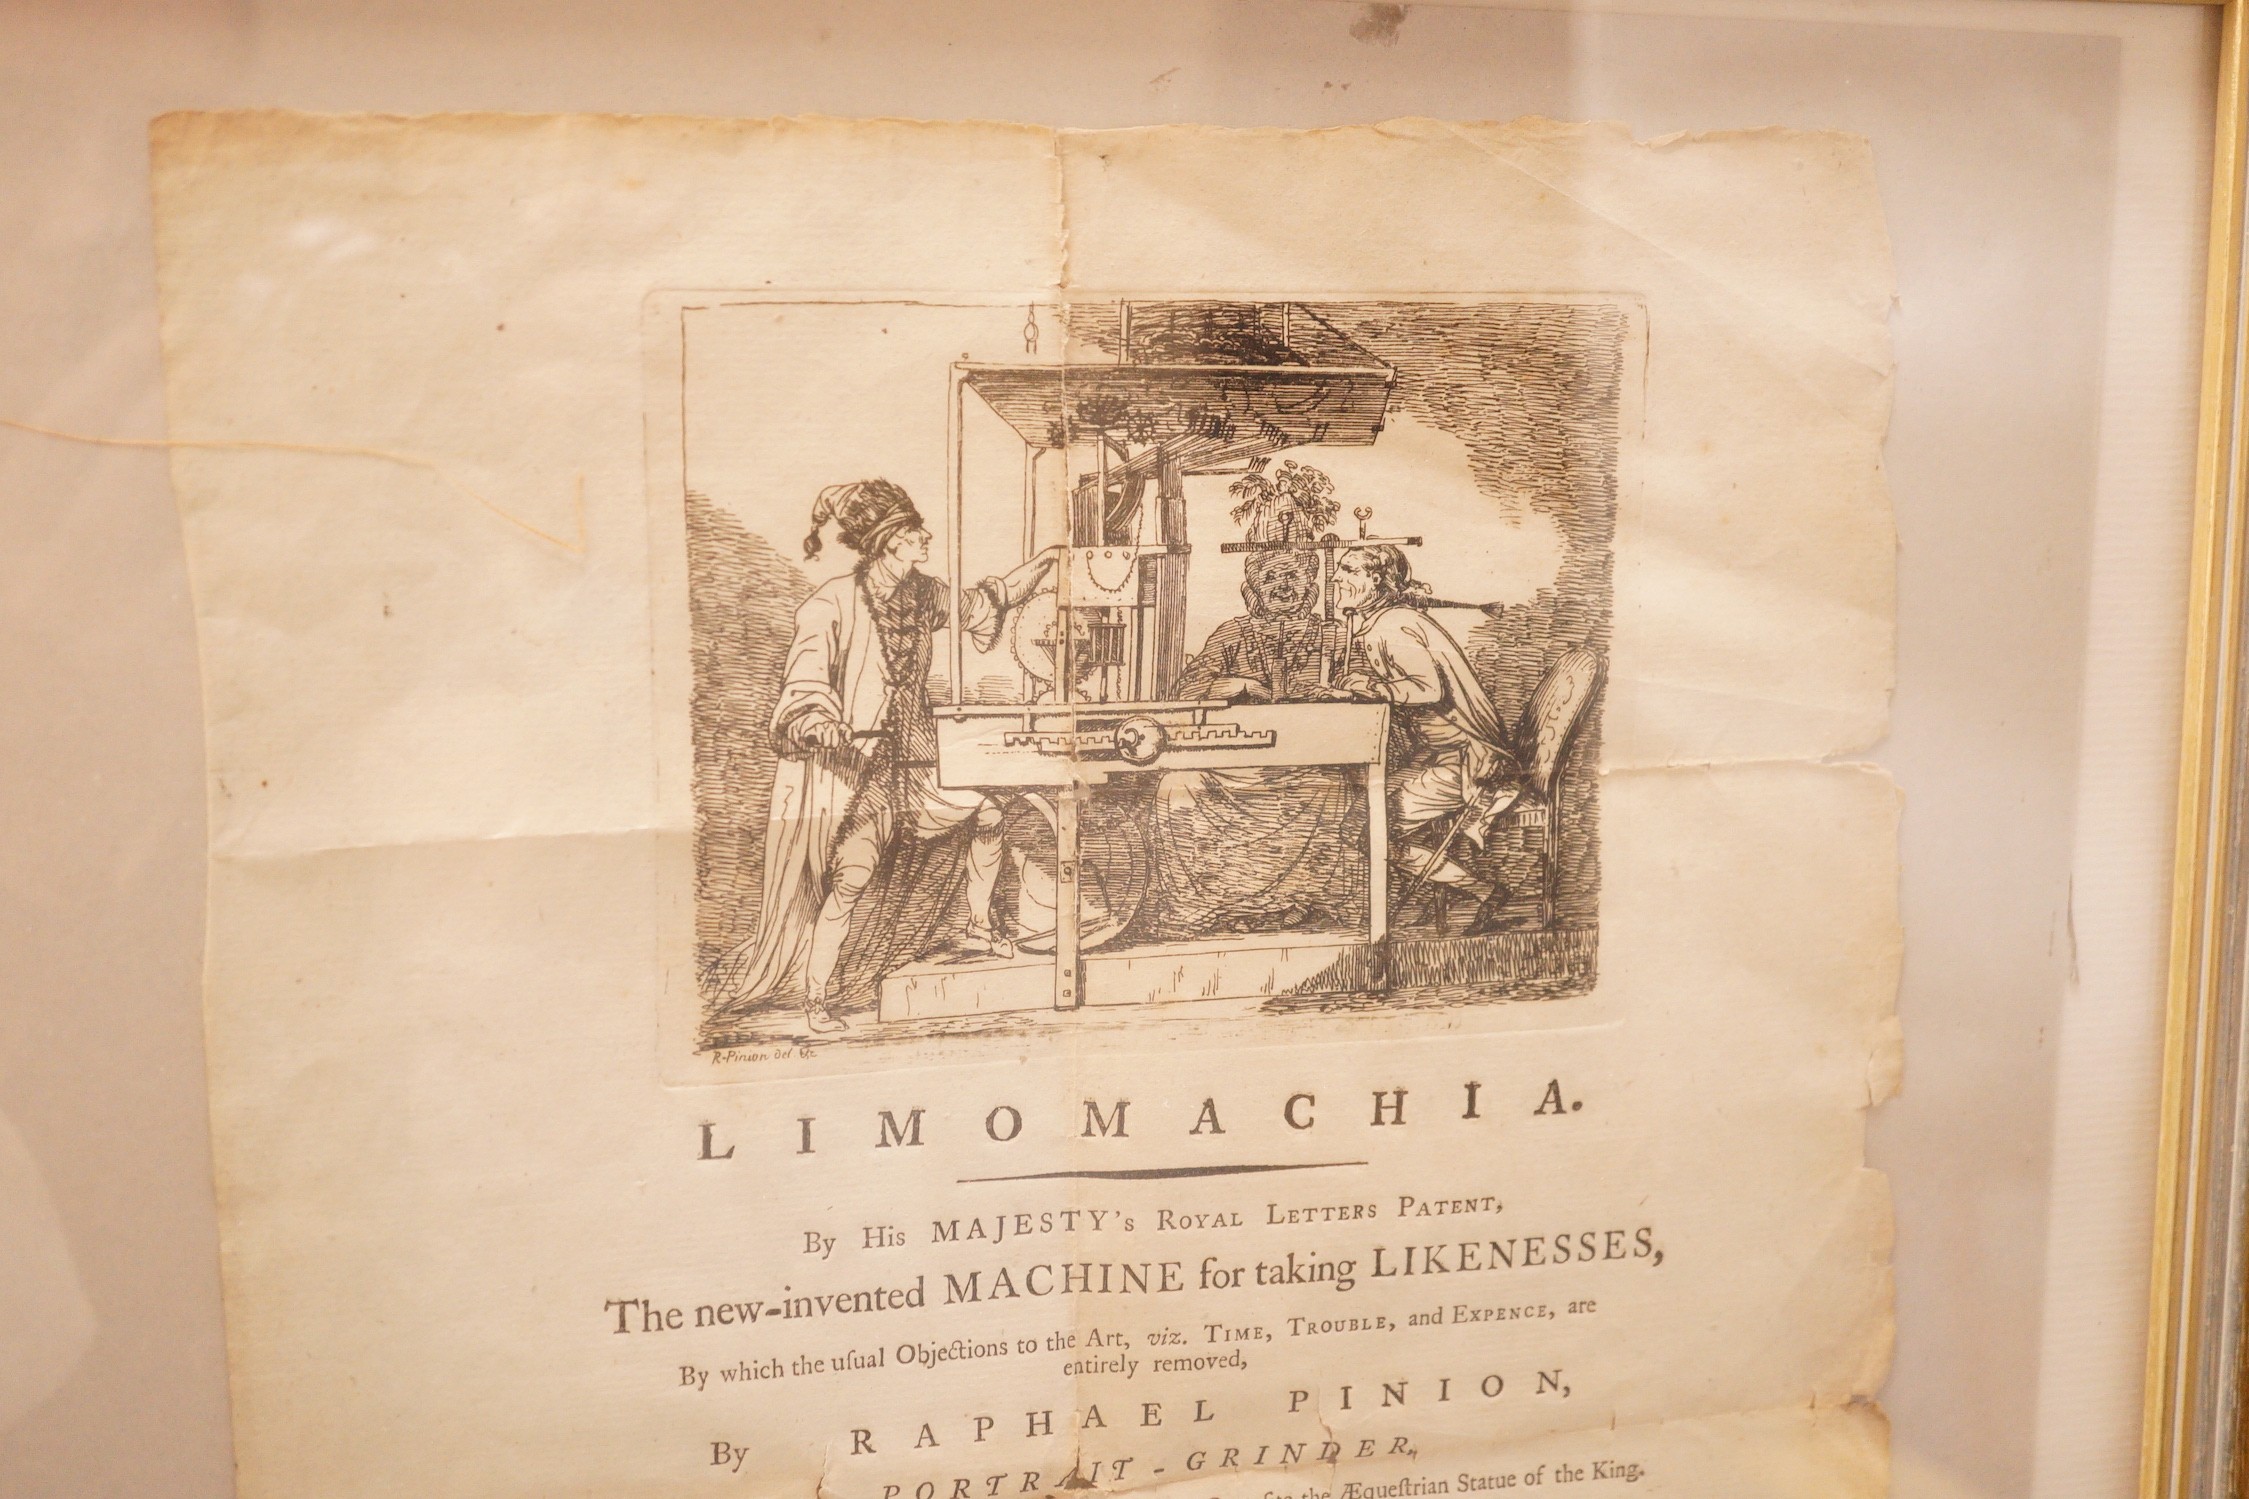 Limomachia, Raphael Pinion, framed page - Image 7 of 10